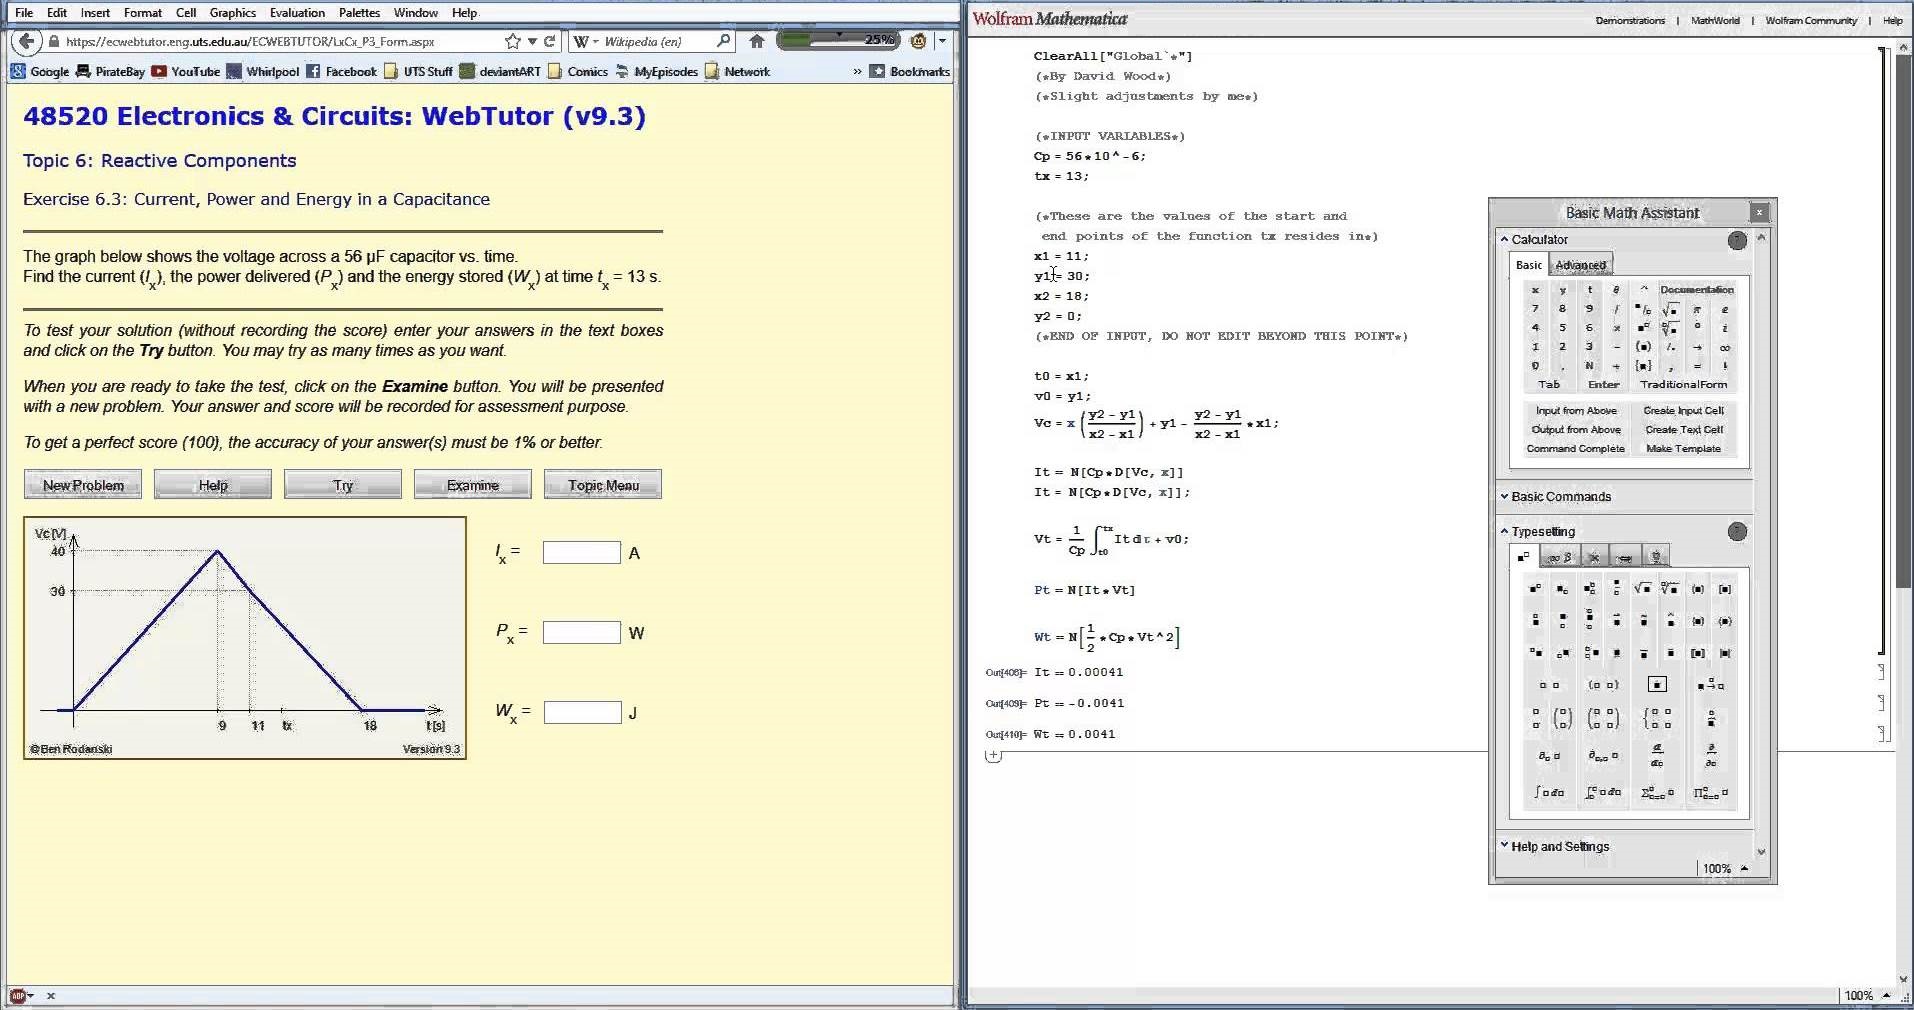 instal the new version for windows Wolfram Mathematica 13.3.0